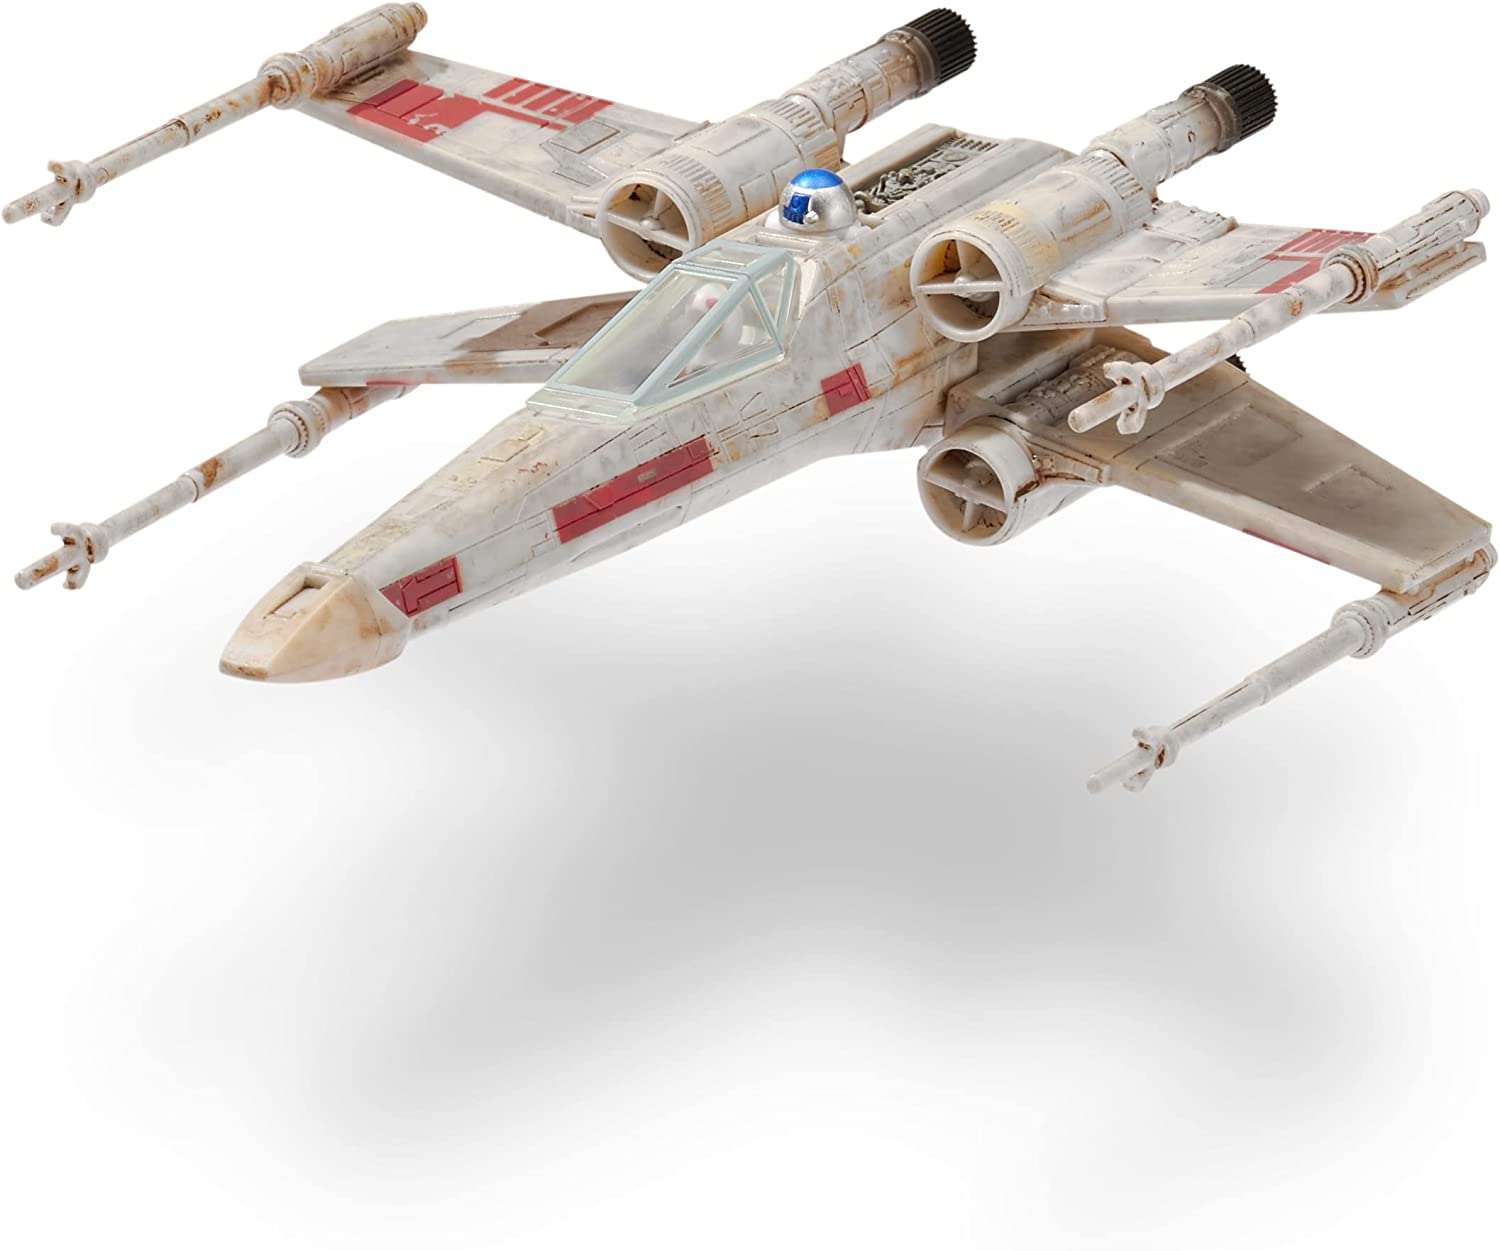 Star Wars Micro Galaxy Squadron Multicolor Evasive Action Battle Pack - image 4 of 5